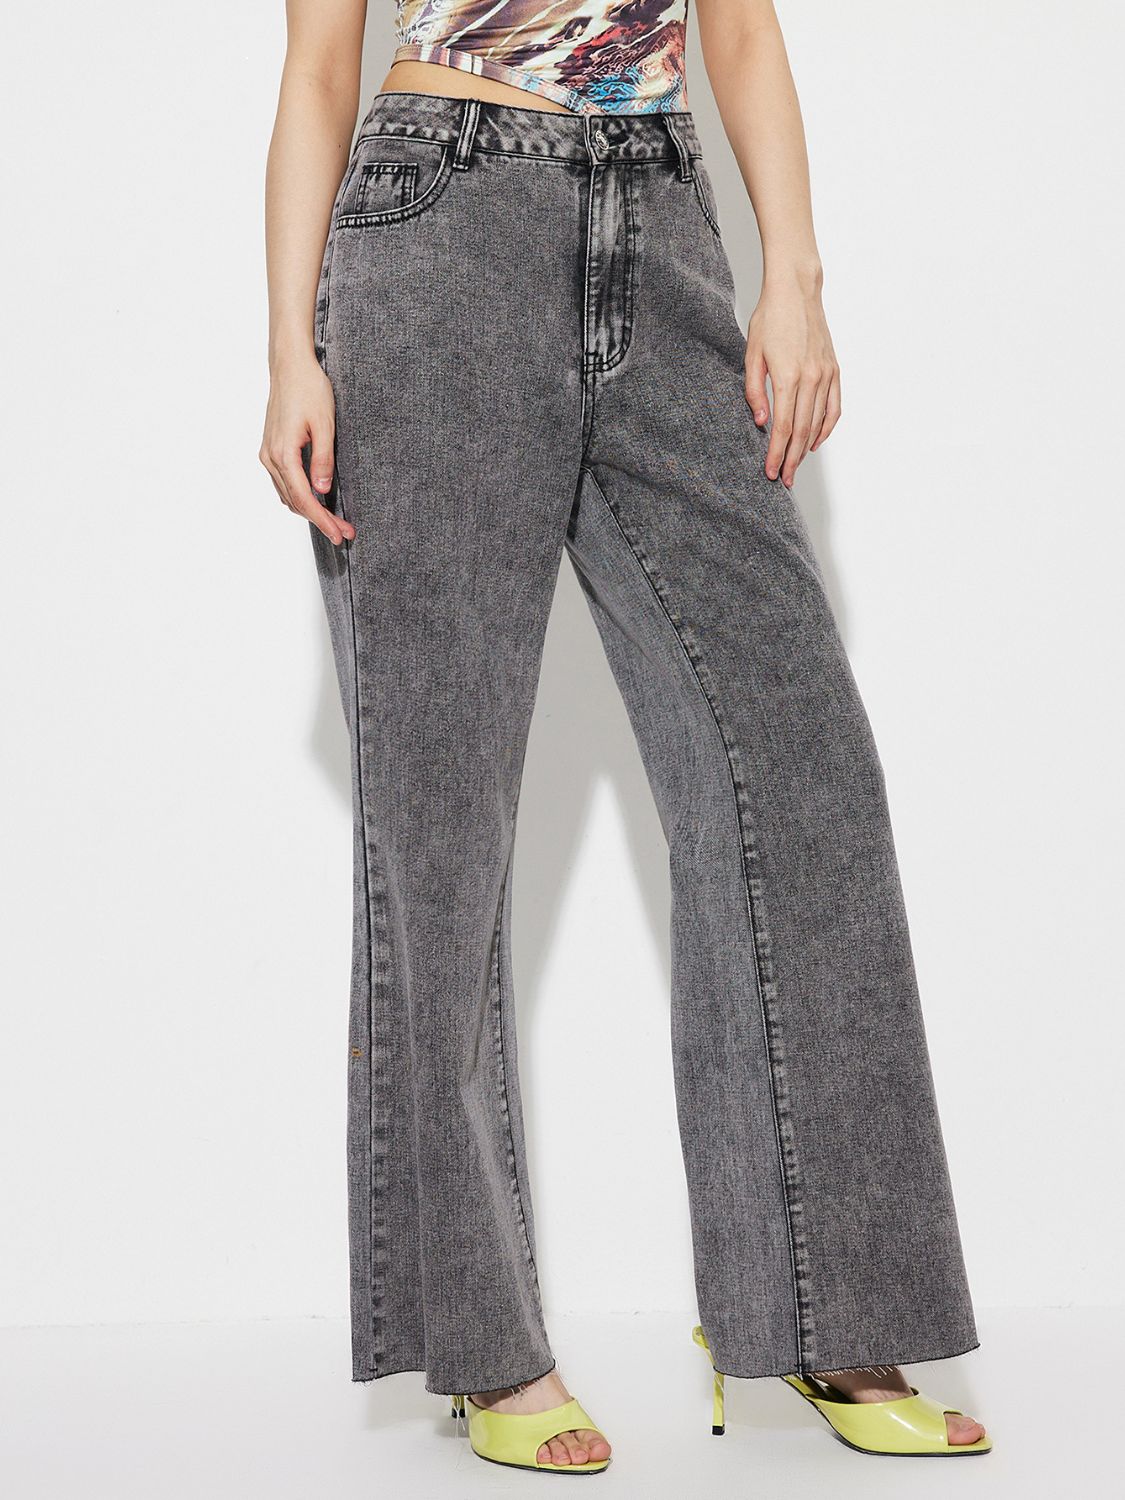 Dim Gray High Waist Bootcut Jeans with Pockets Trendsi Apparel & Accessories